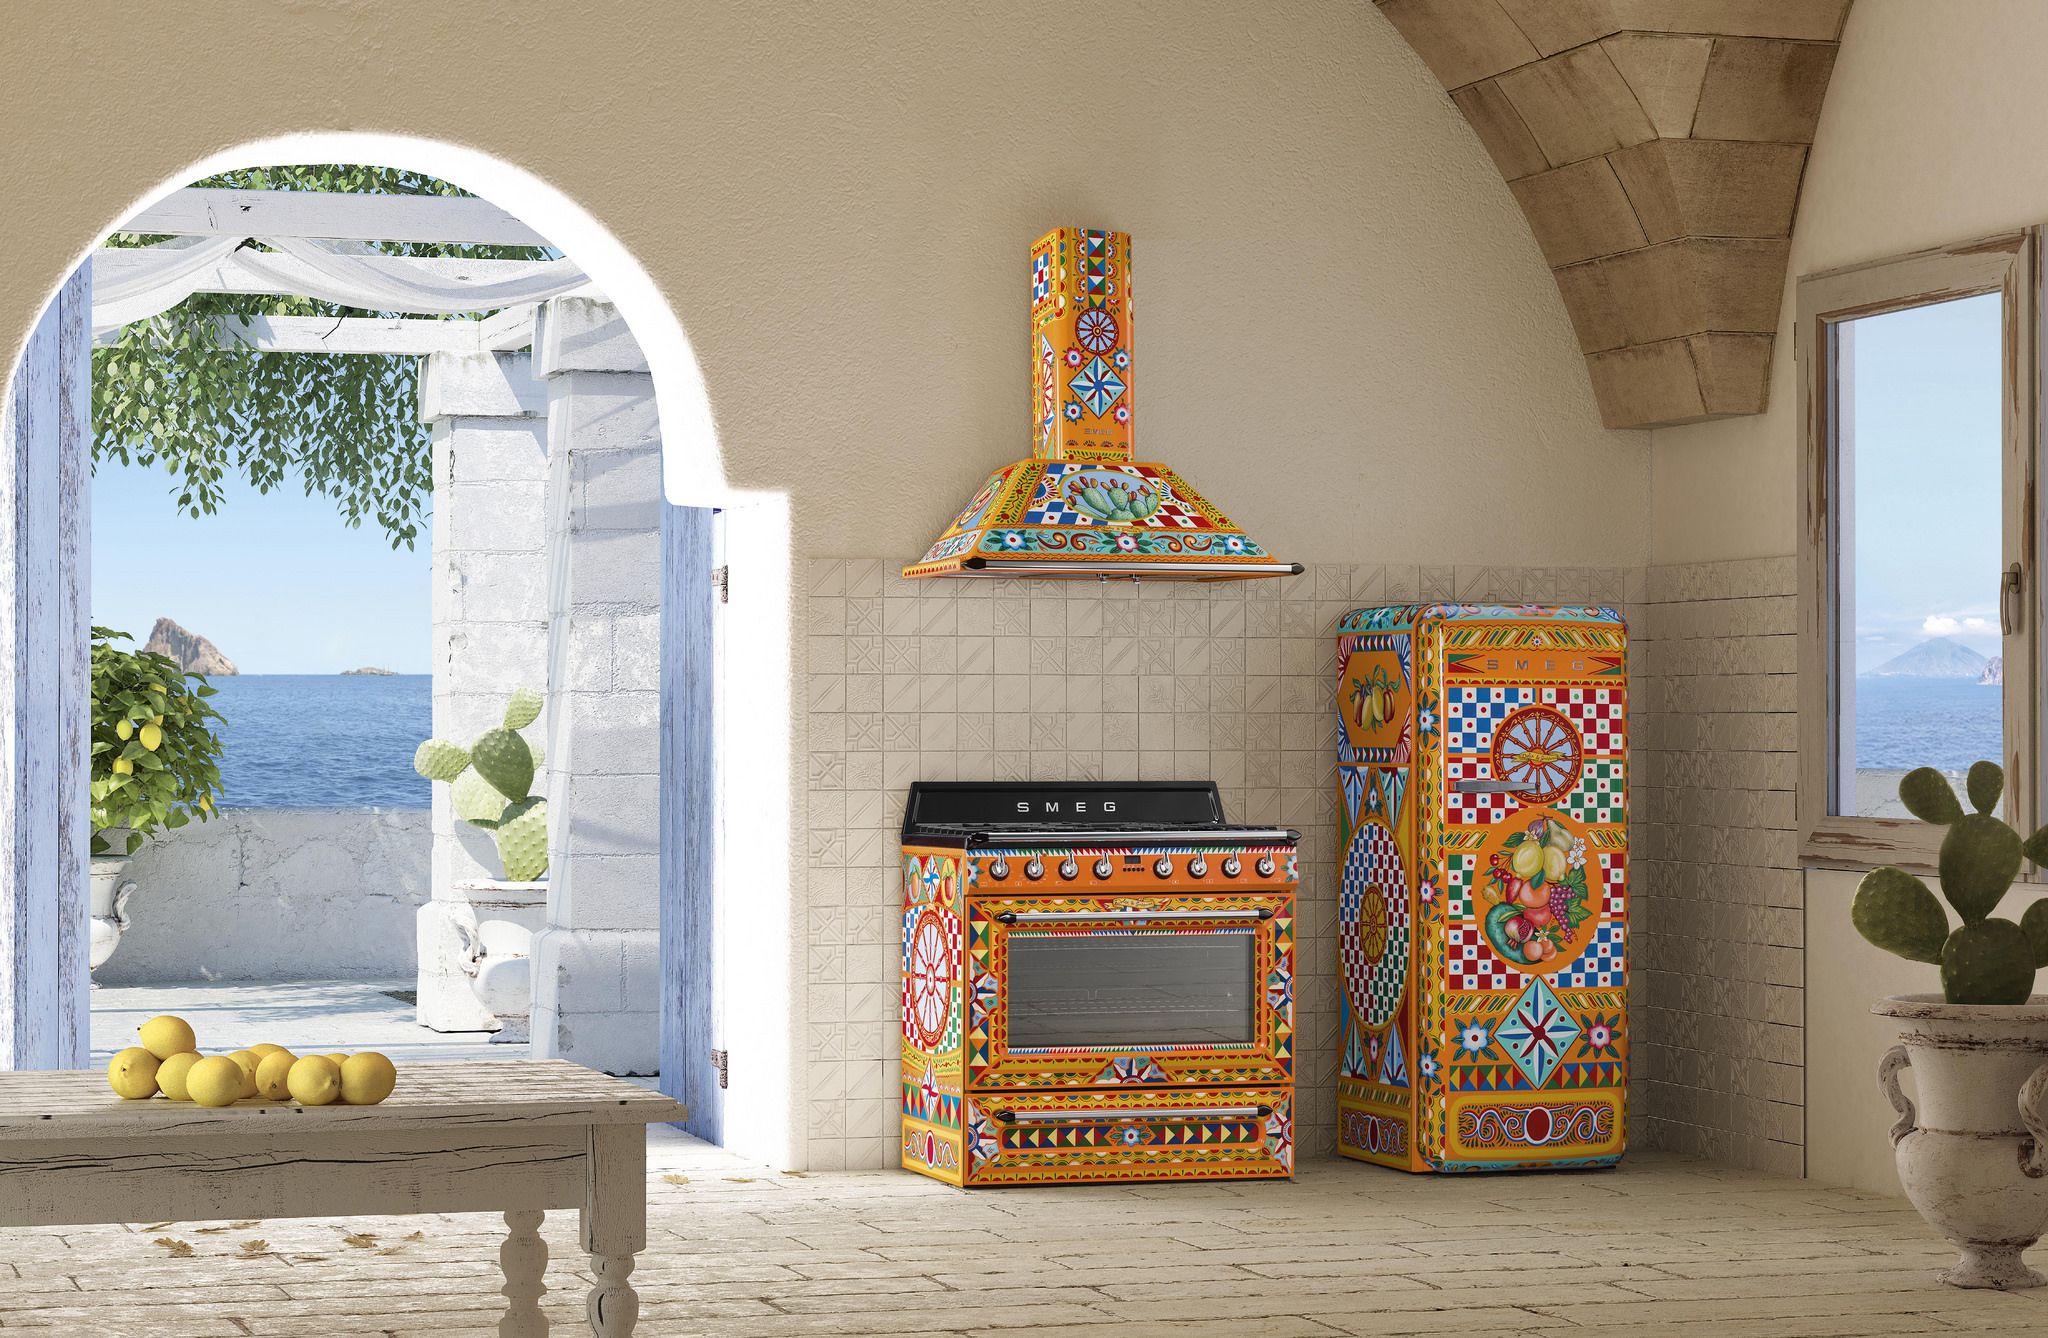 Get a Smeg and Dolce & Gabbana Kitchen With Their Divina Cucina Cooker Range